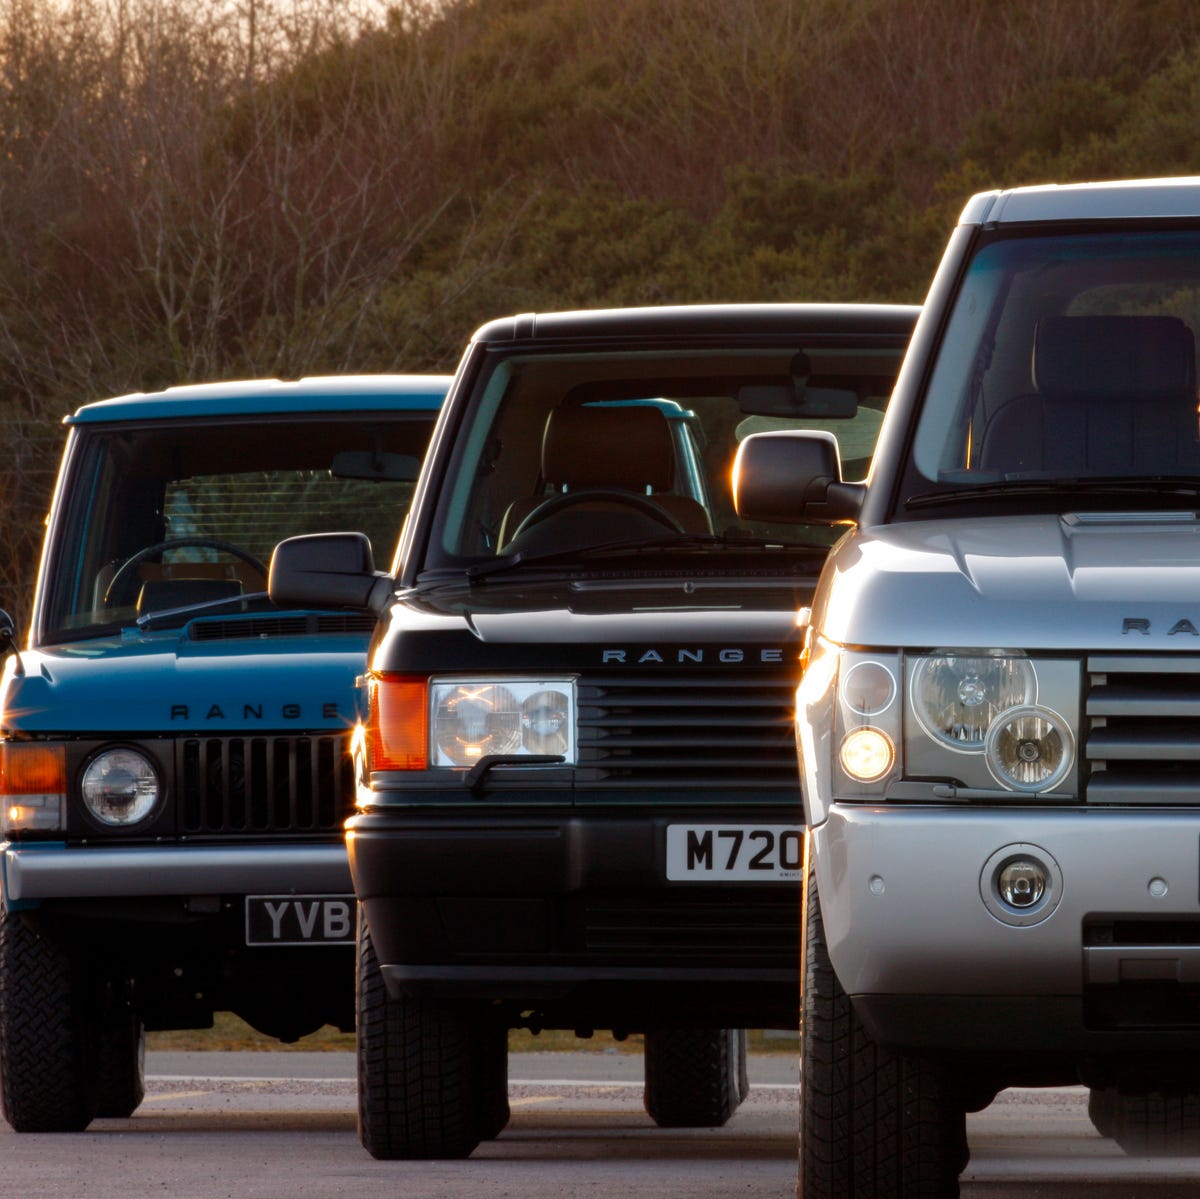 The Range Rover: The History of an Iconic Luxury SUV